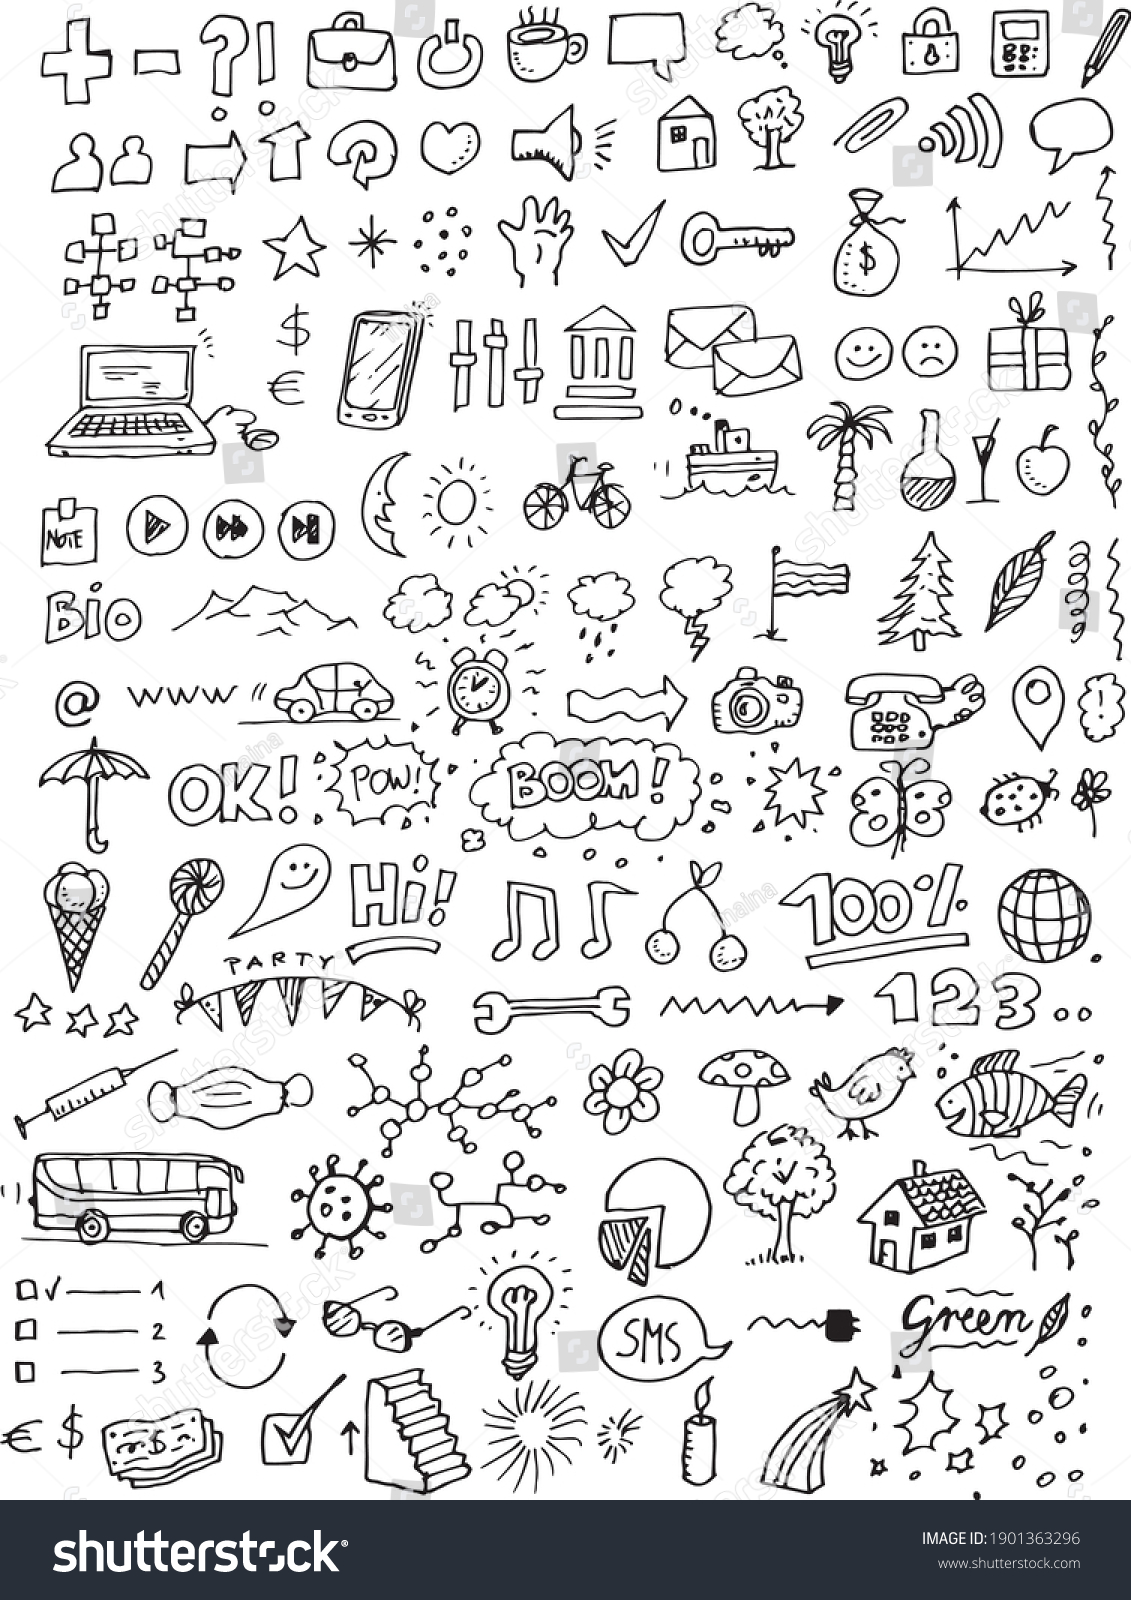 Different Doodles Hand Drawn Vector Icons Stock Vector (Royalty Free ...